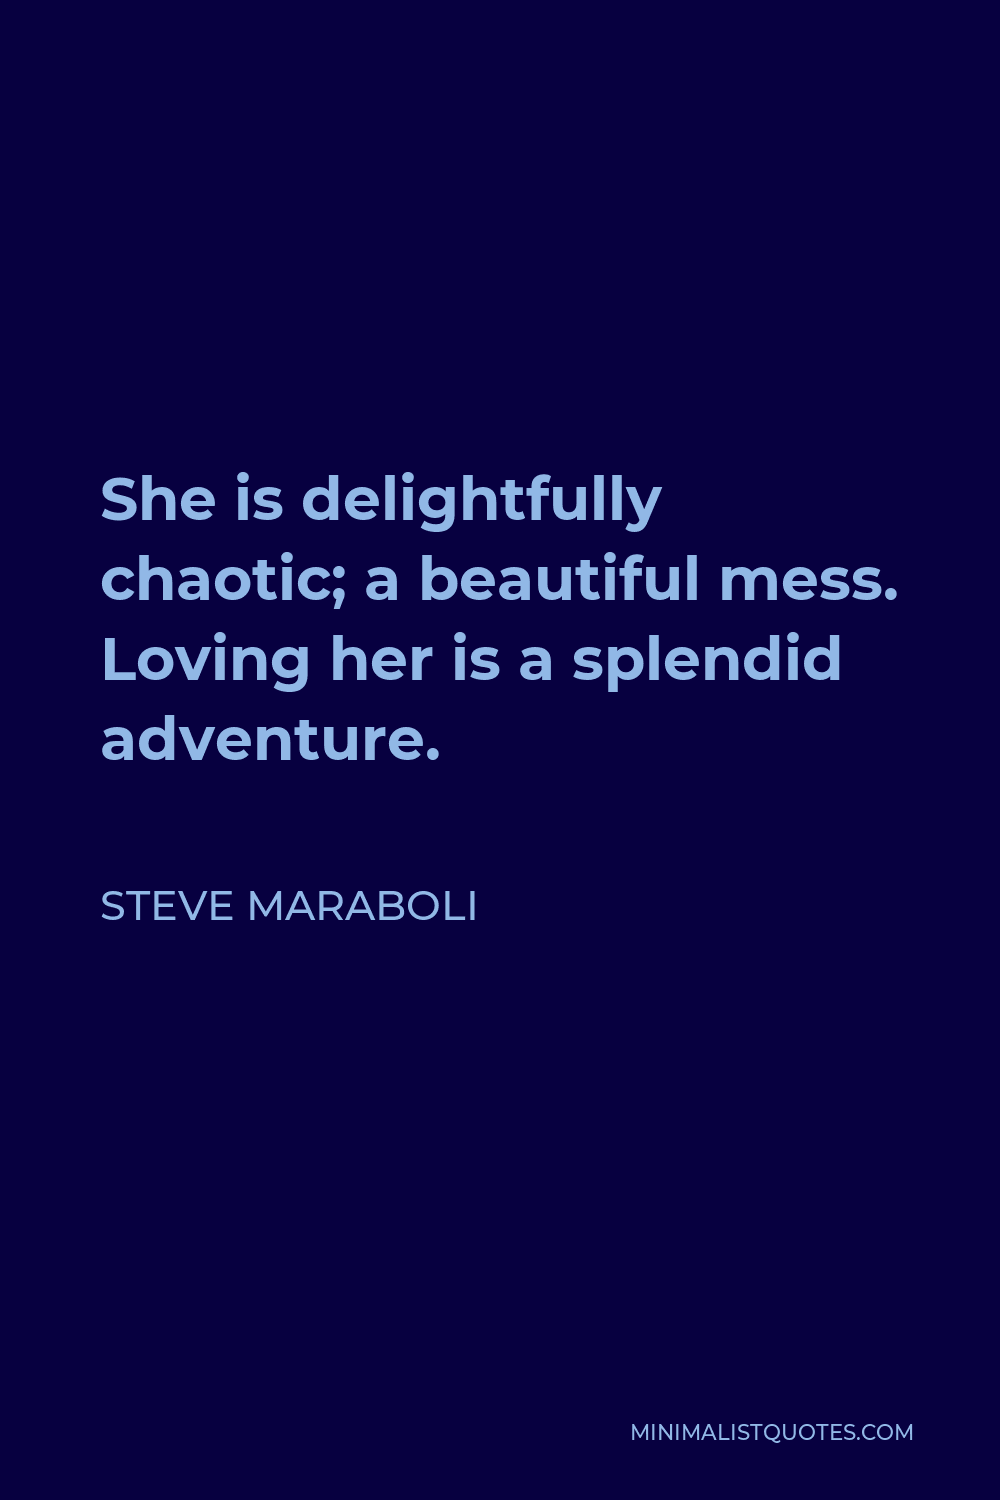 Steve Maraboli Quote - She is delightfully chaotic; a beautiful mess. Loving her is a splendid adventure.